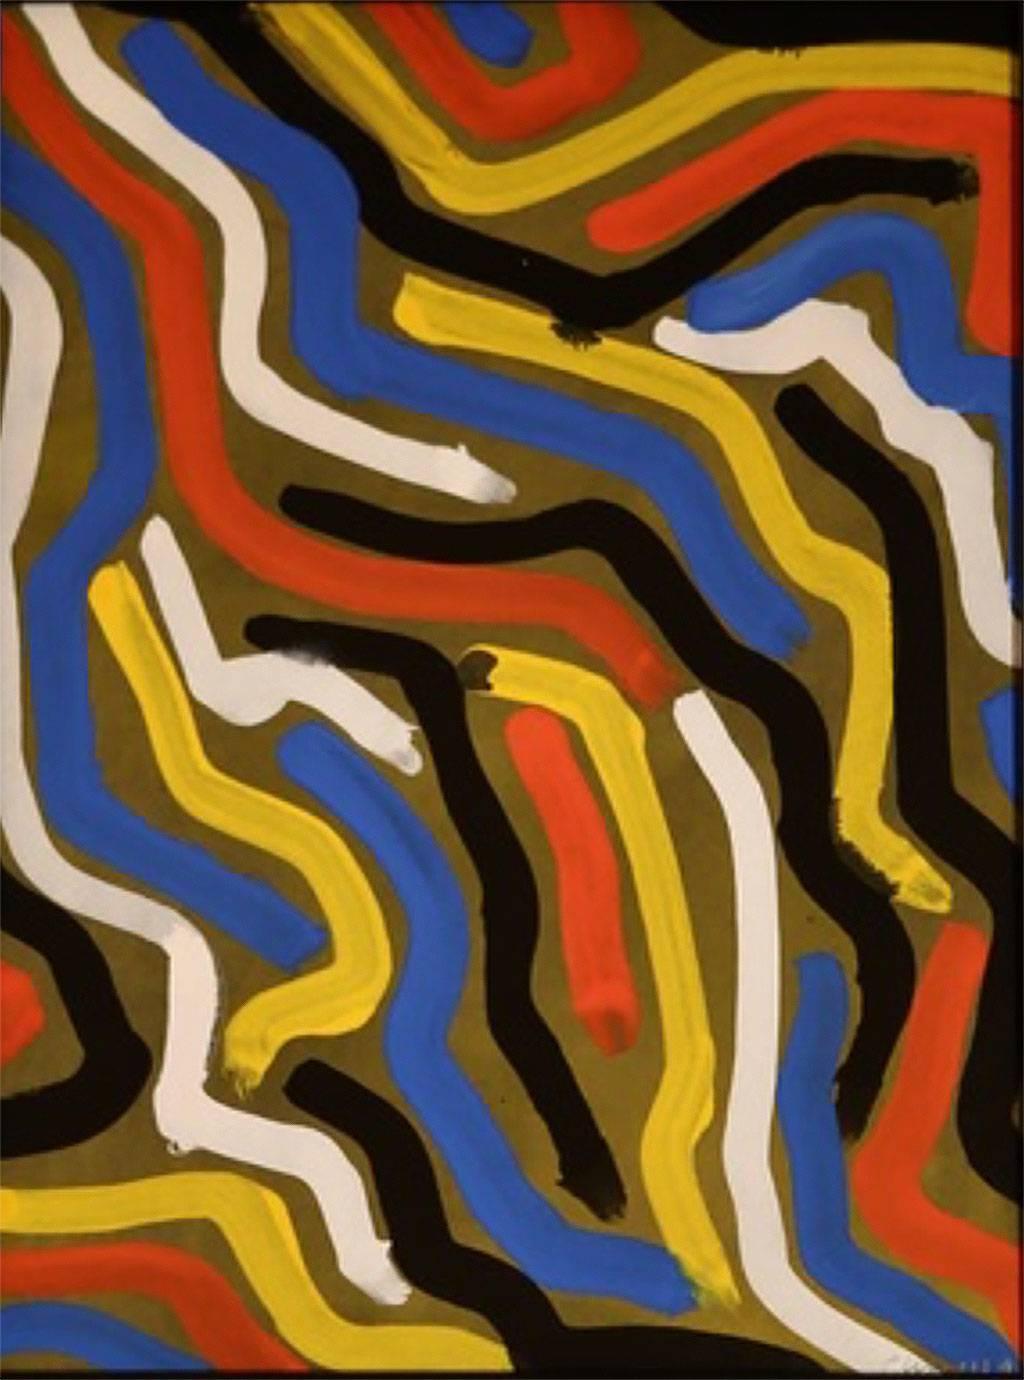 Untitled - Painting by Sol LeWitt